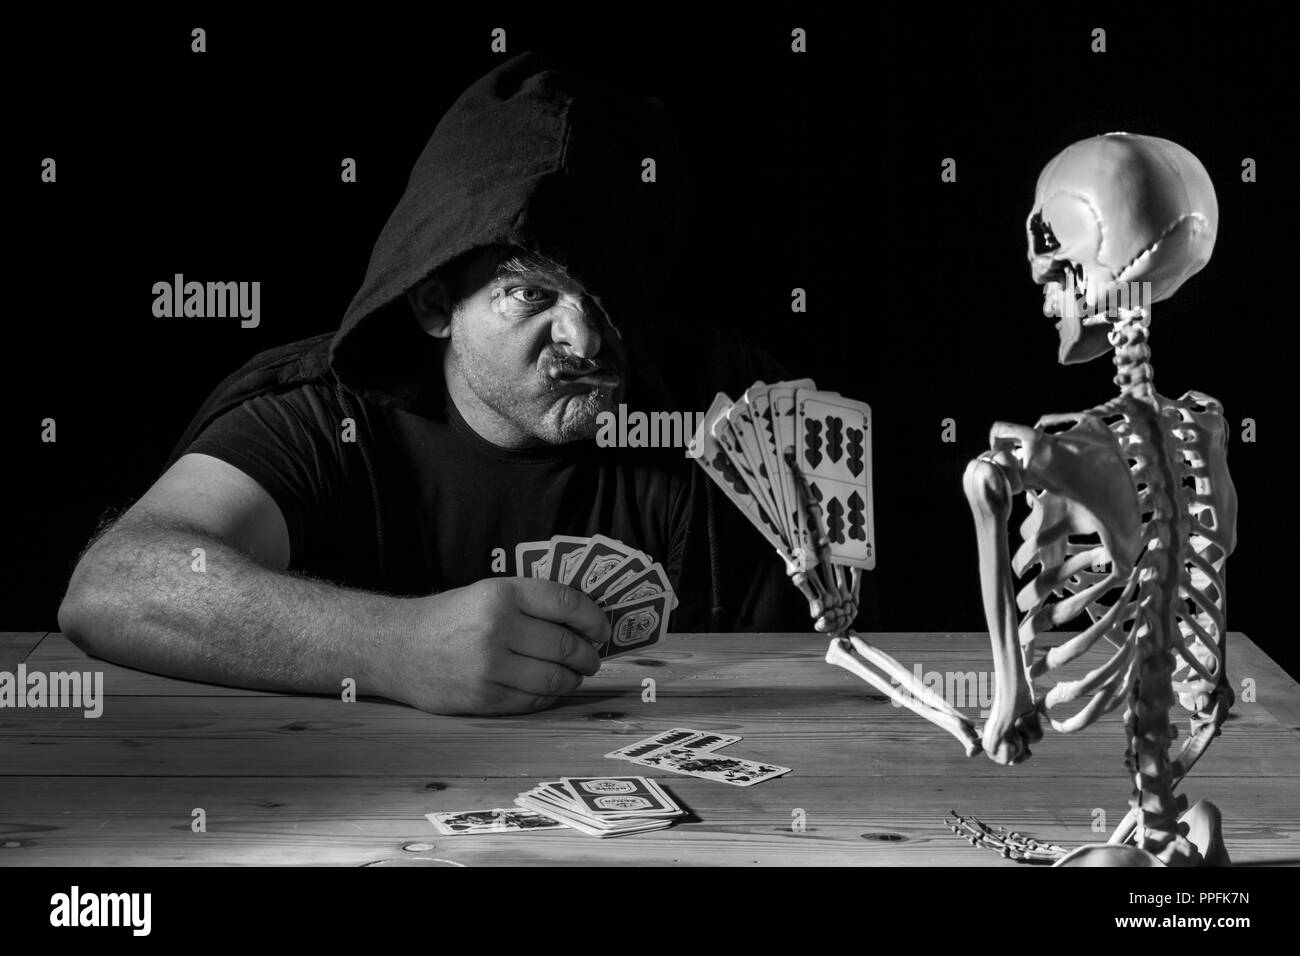 Man plays cards with a skeleton, his last game, symbol image for life and death, Germany Stock Photo